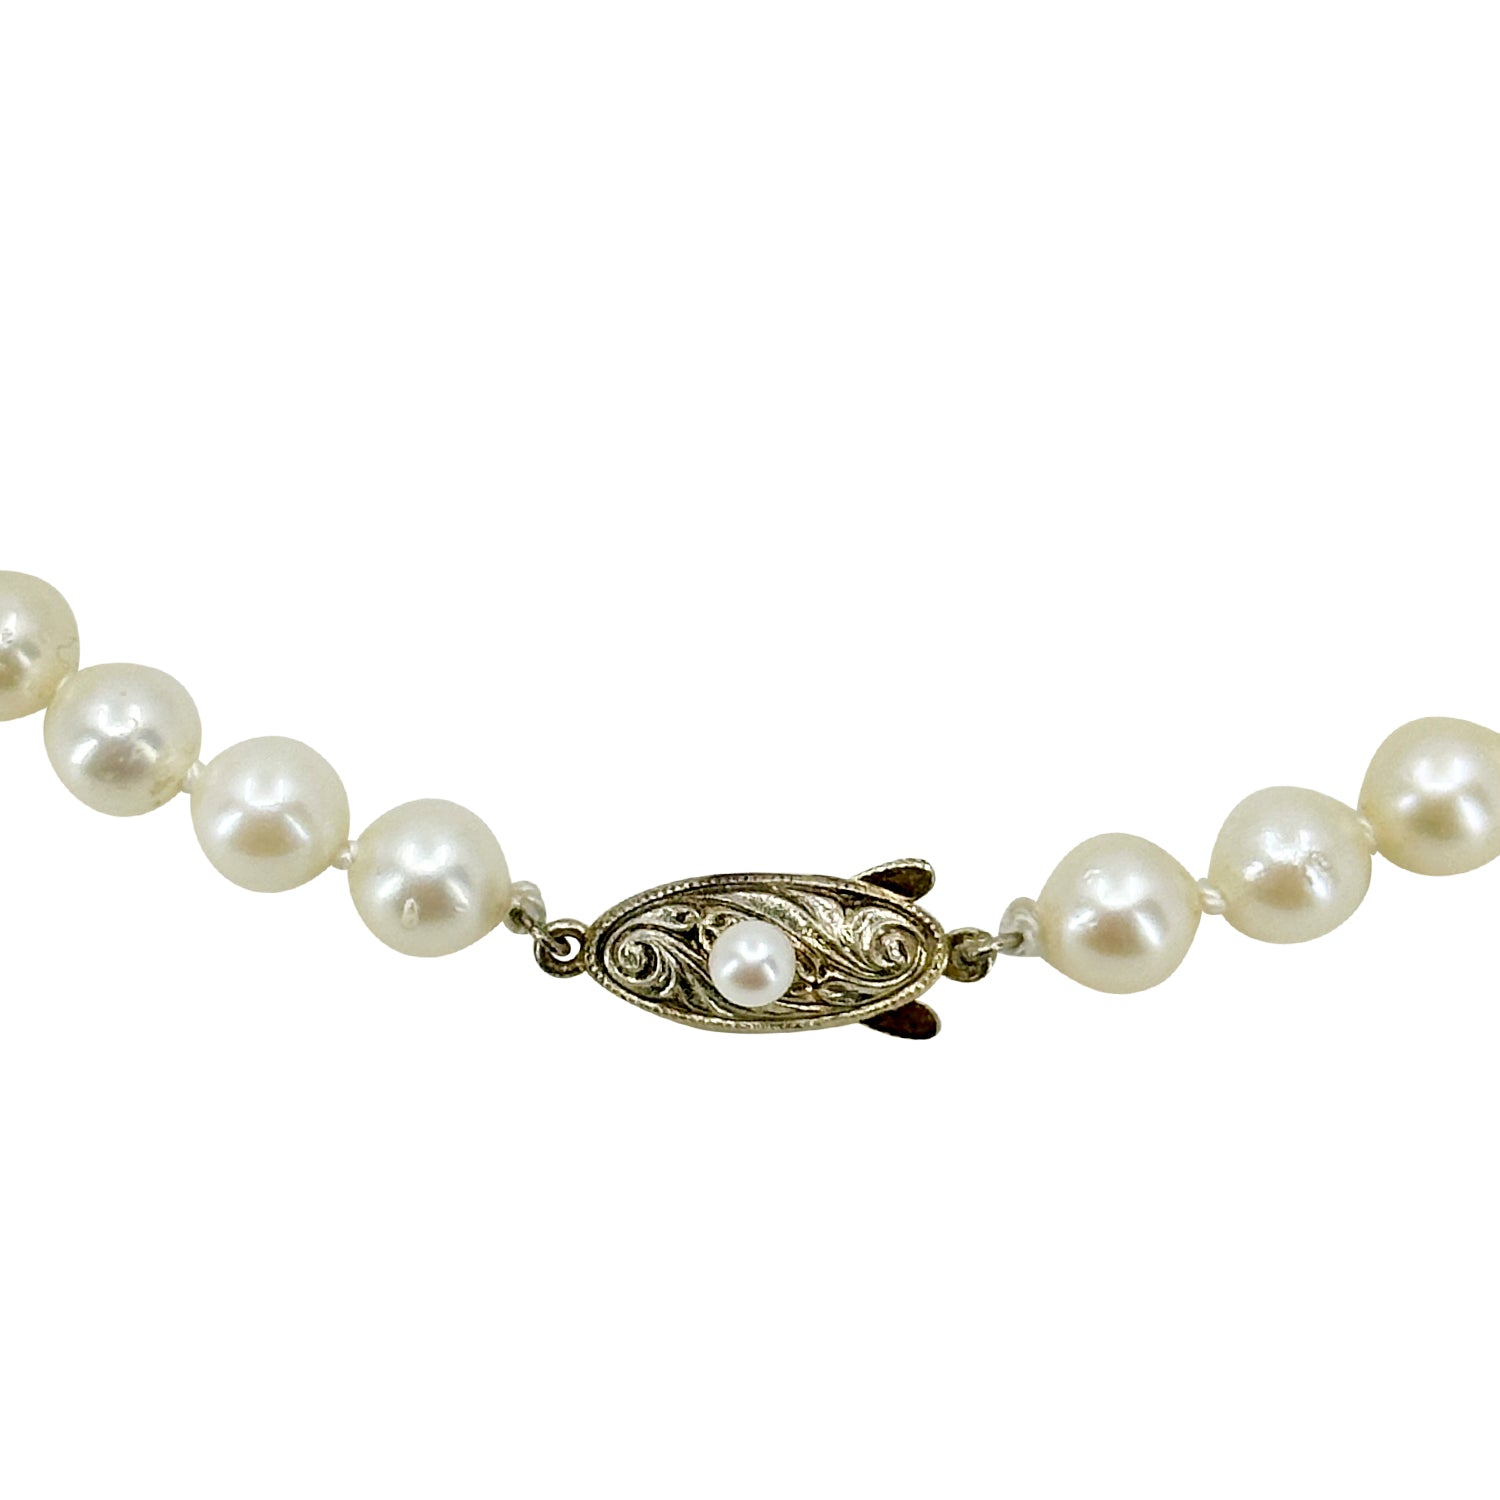 Choker Vintage Japanese Saltwater Akoya Cultured Pearl Necklace - Sterling Silver Gold Filled 13.75 Inch